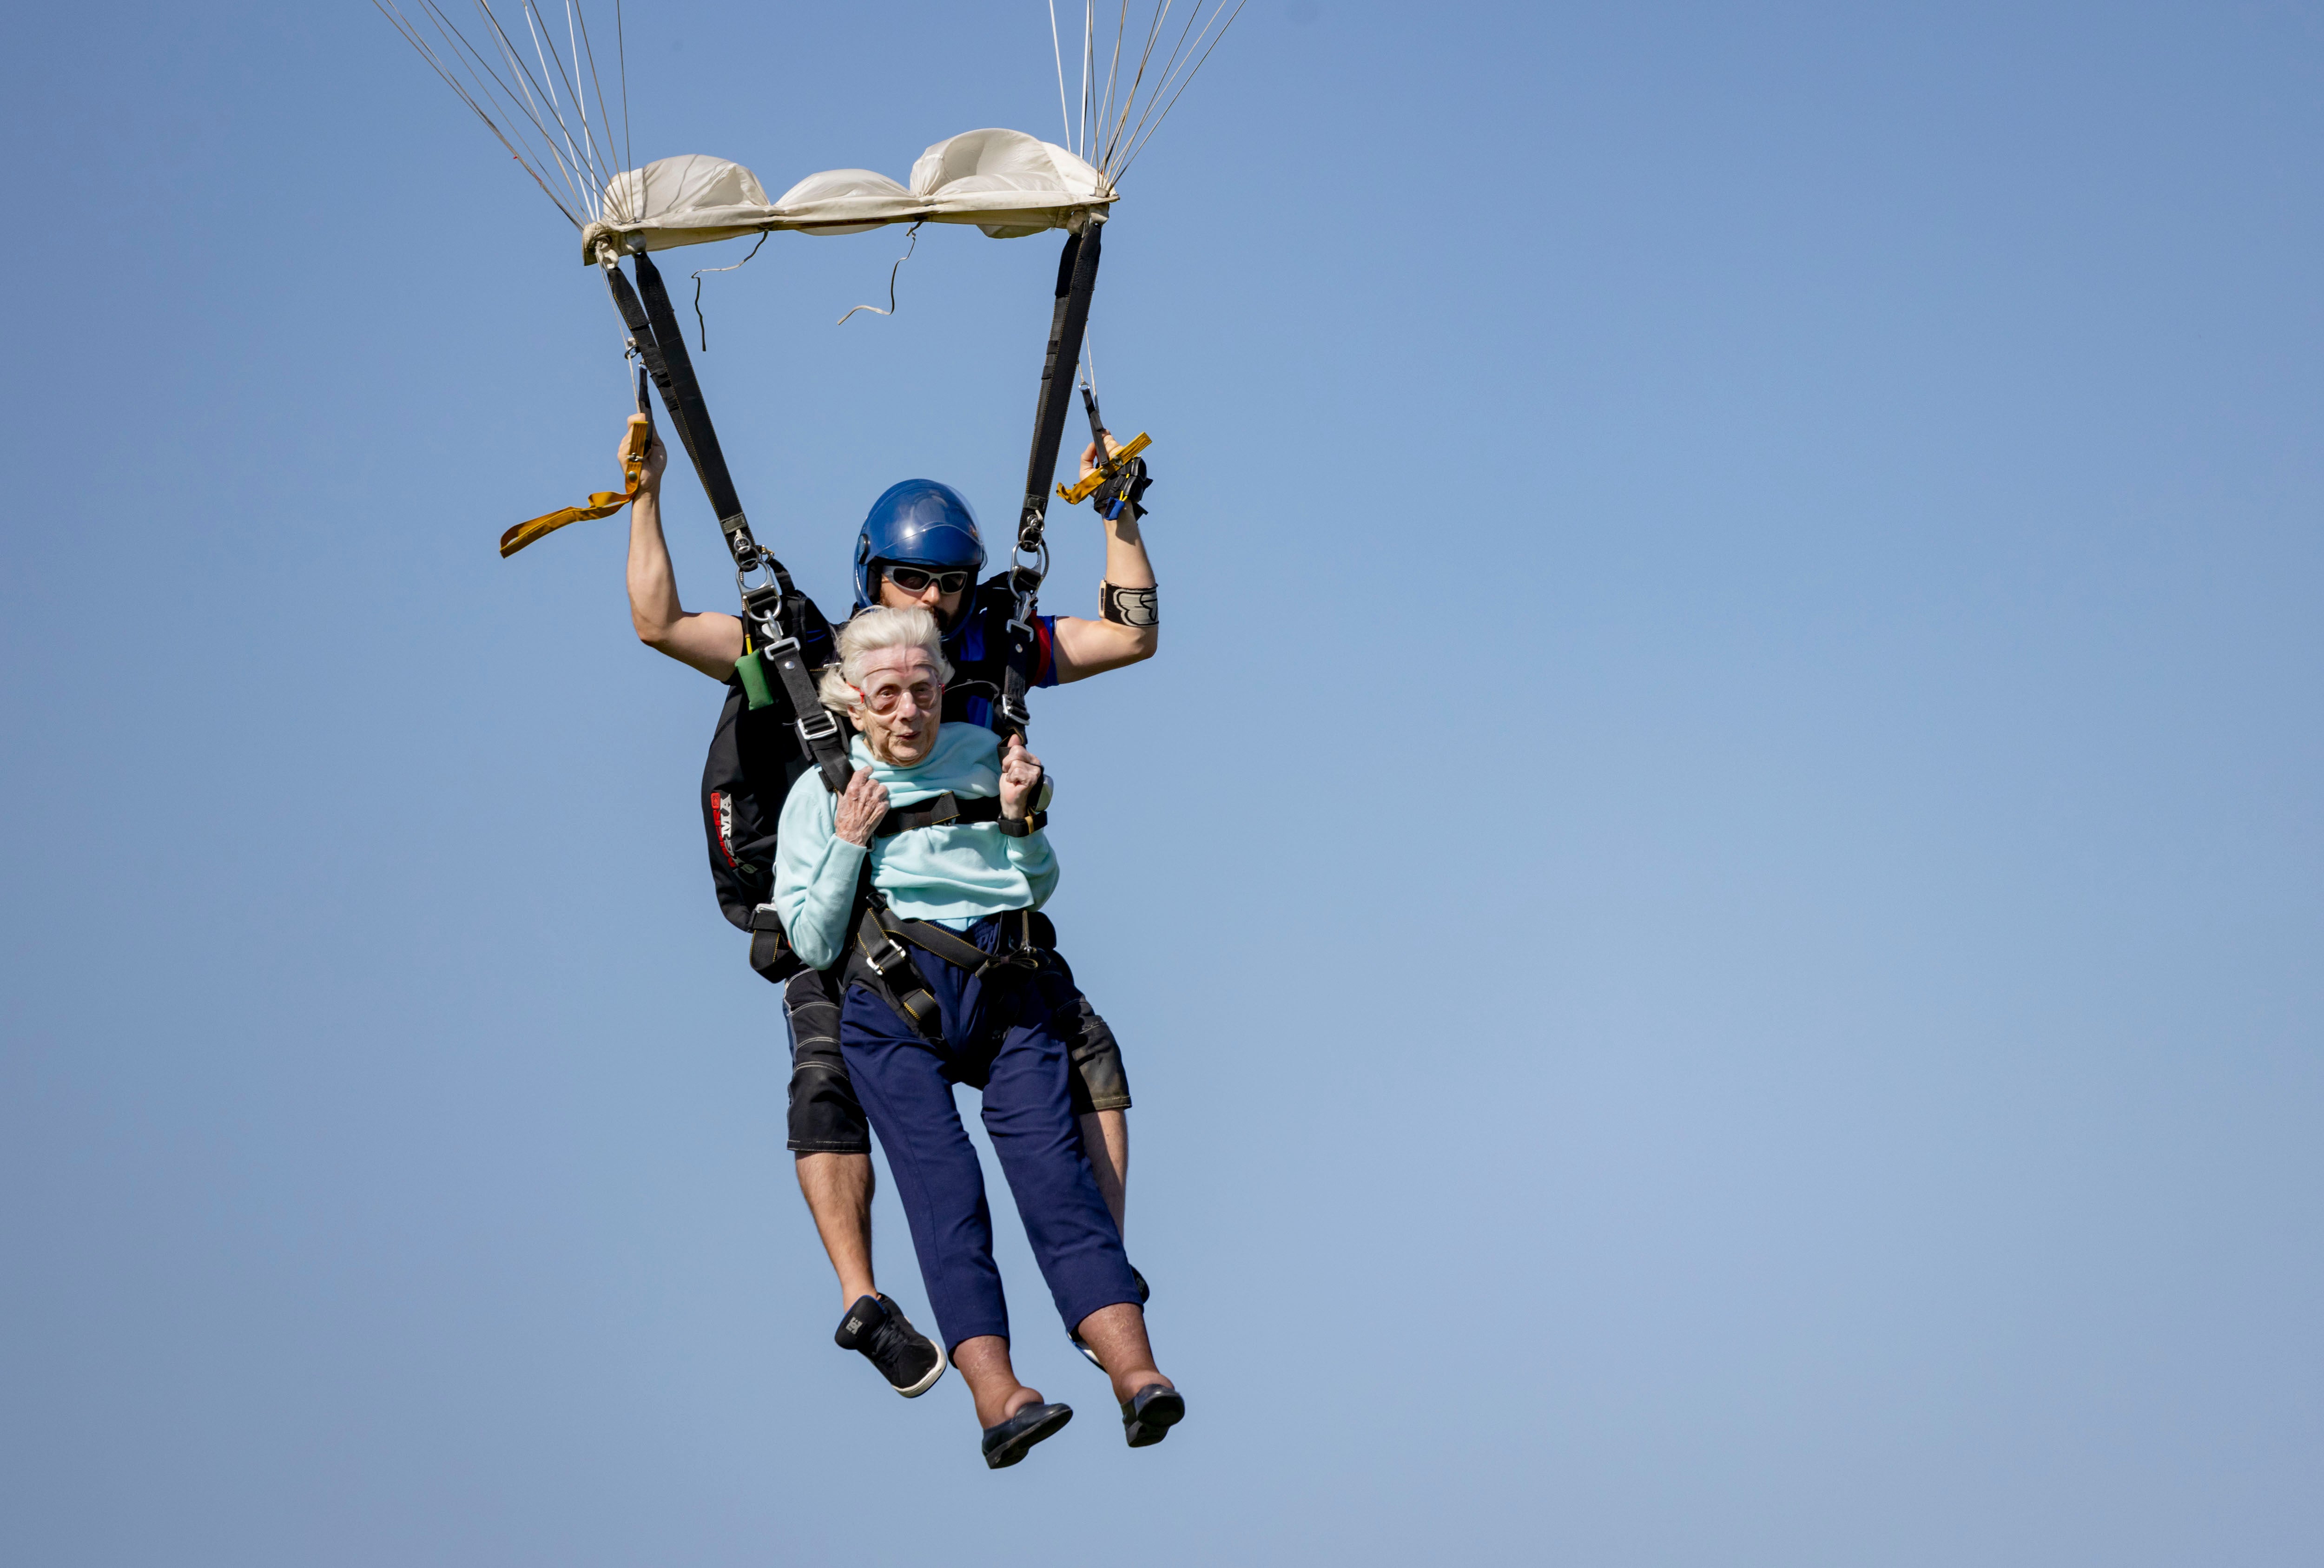 Dorothy Hoffner’s close friend says she didn’t skydive to break a record but because she had thoroughly enjoyed her first jump